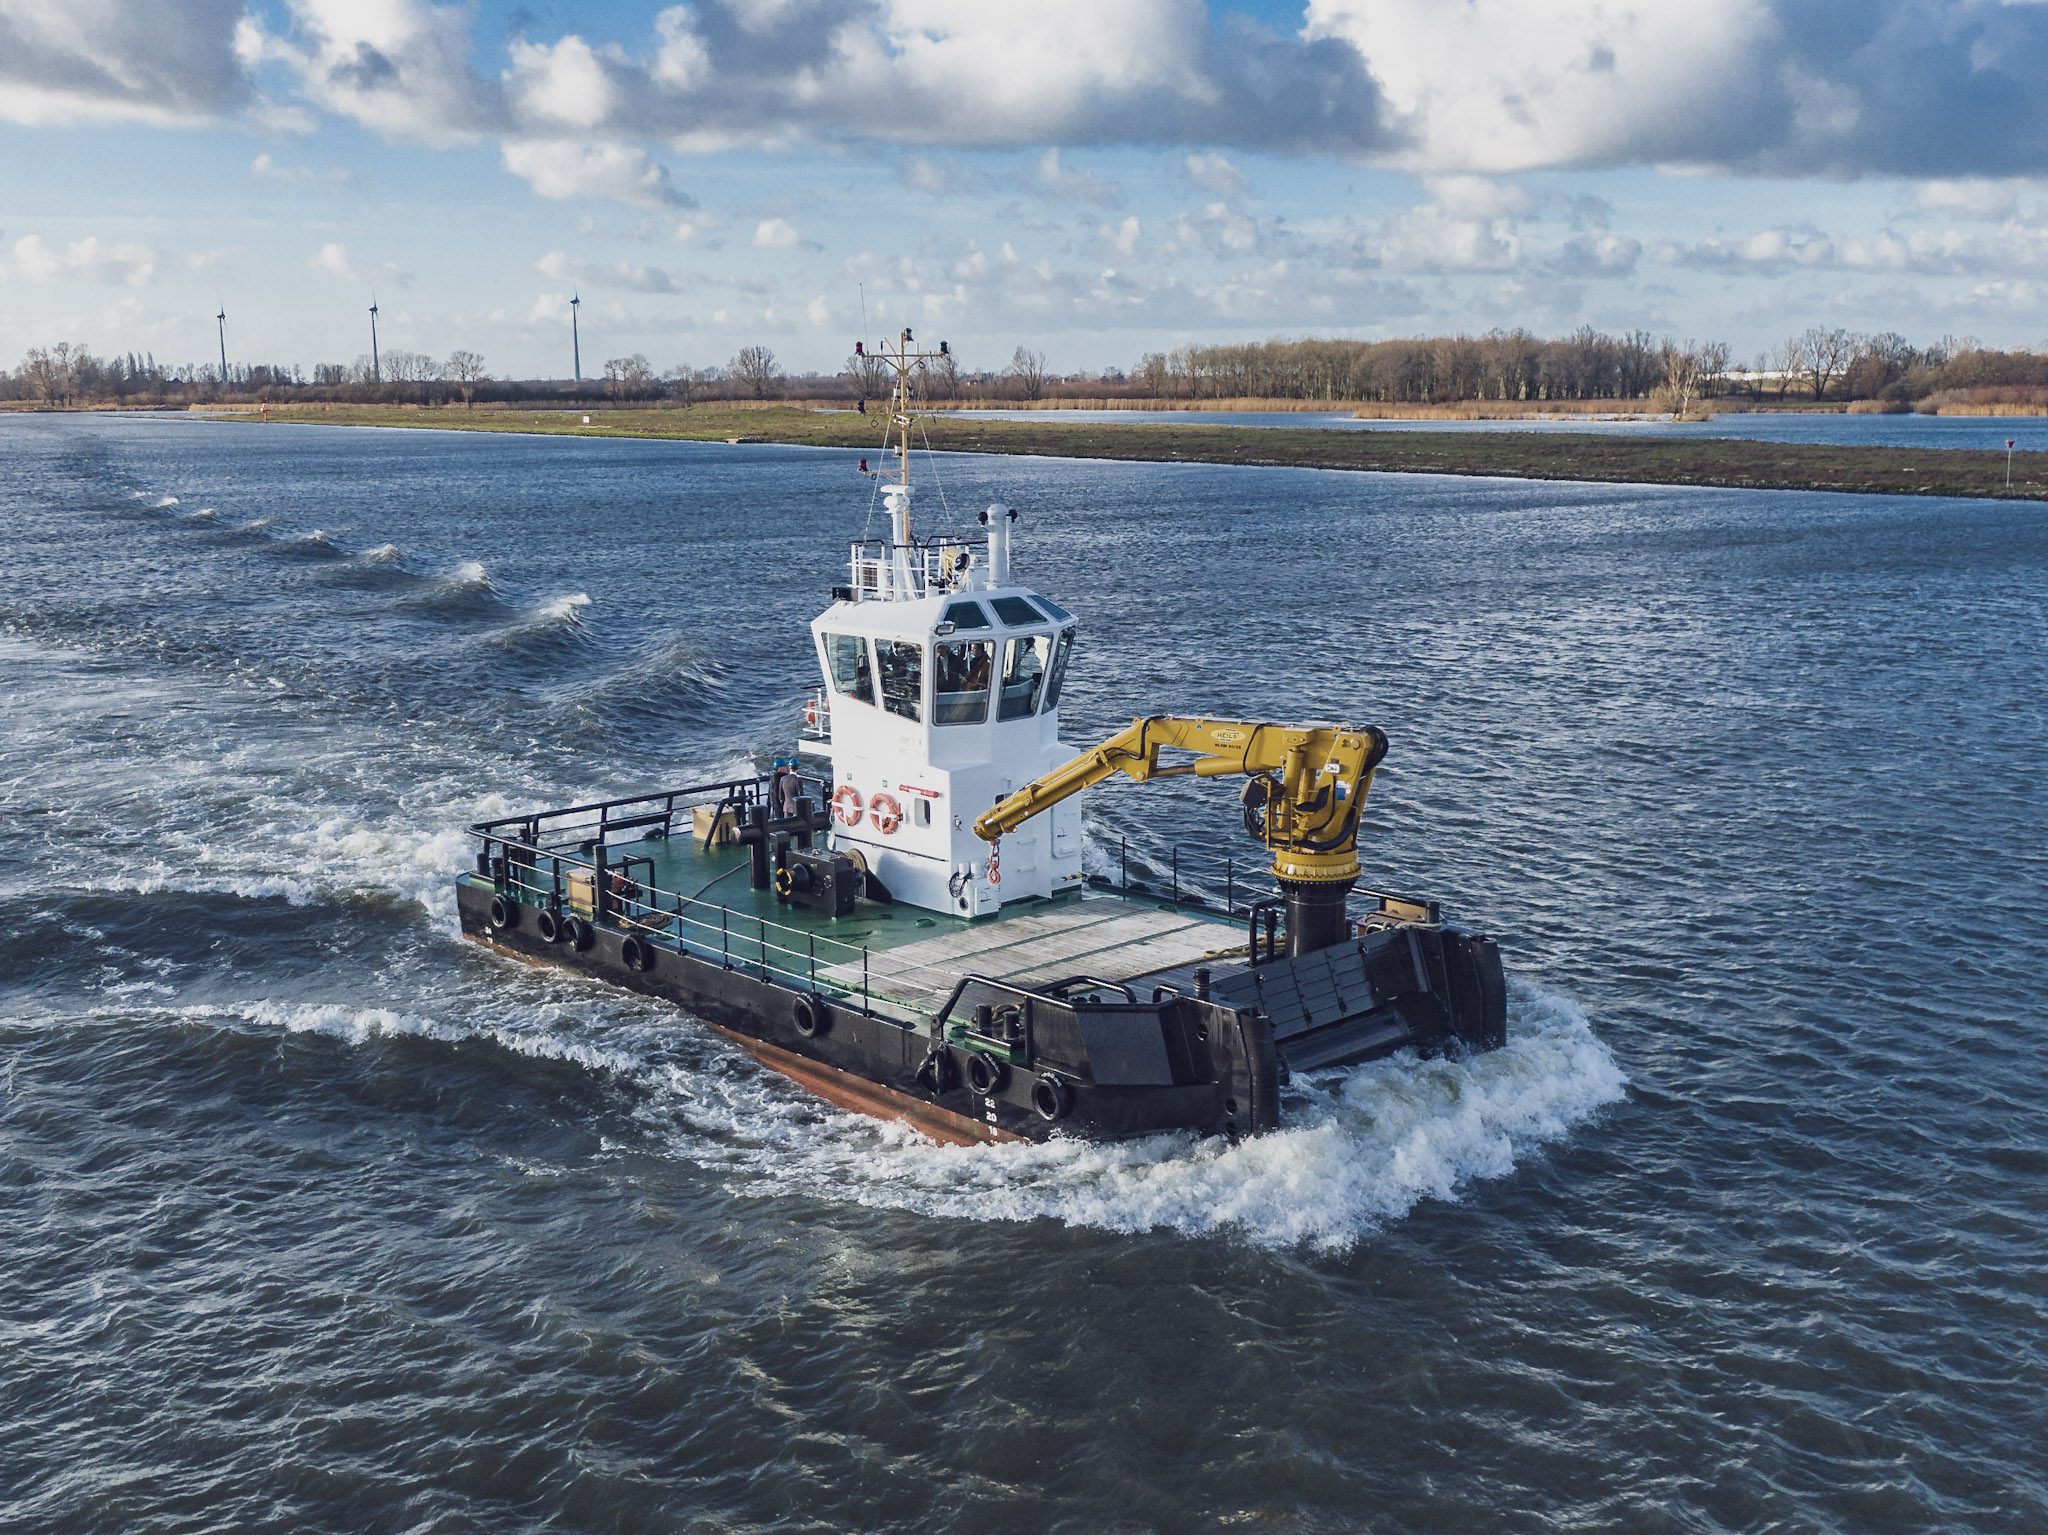 Walsh & Sons selects Damen Multi Cat for long-term goals